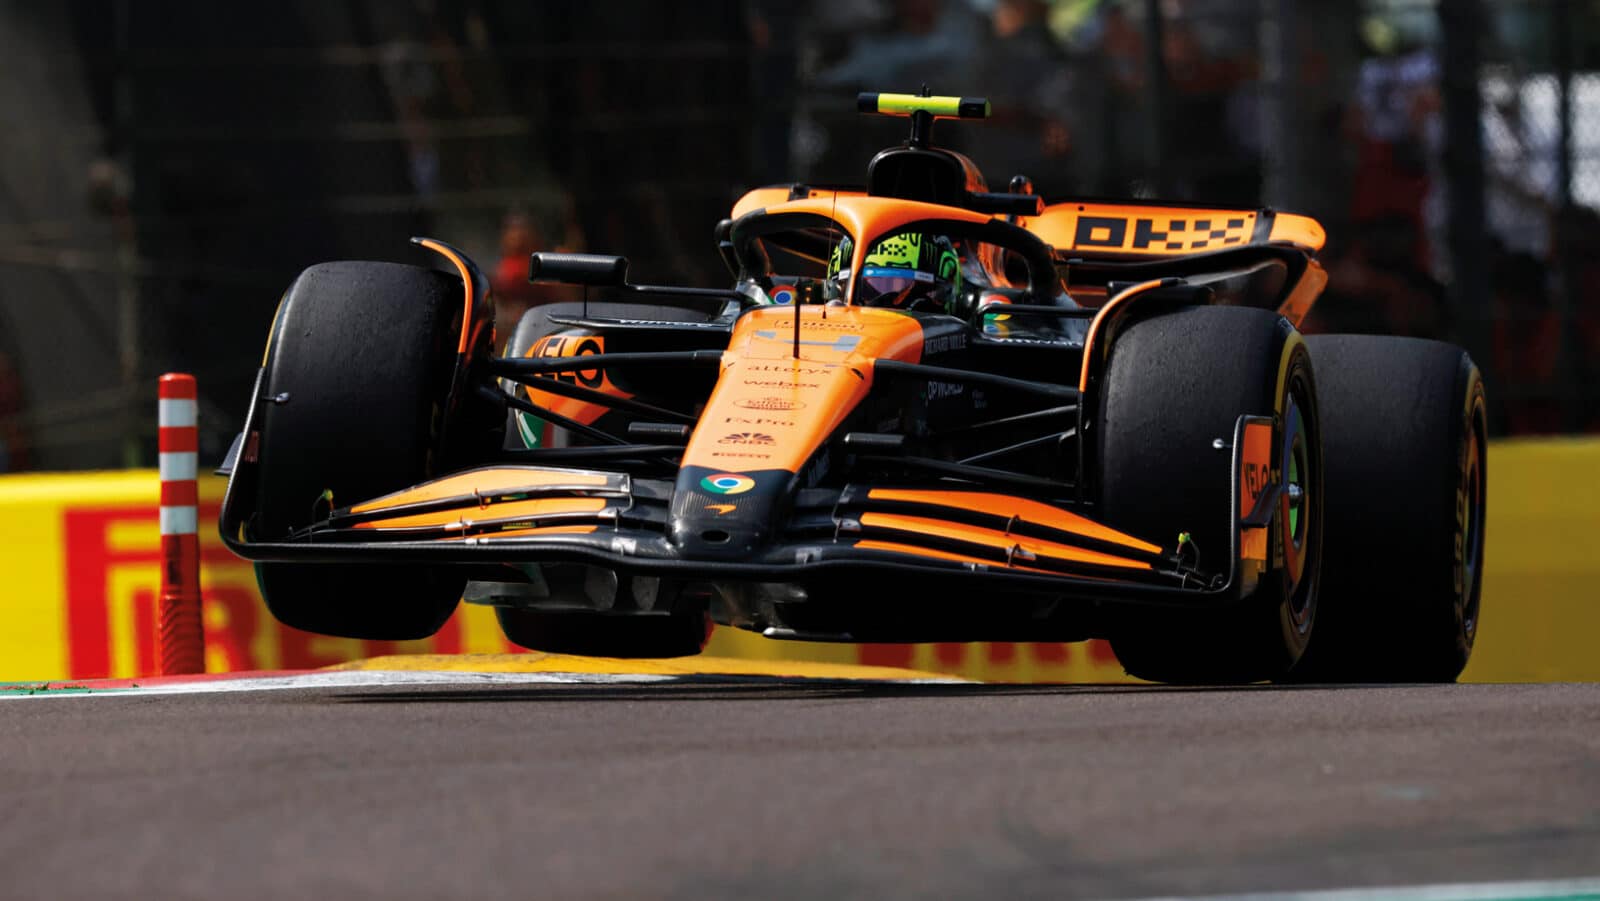 Lando Norris was flying in the Emilia-Romagna Grand Prix; “Whoa...” – Max Verstappen was rattled